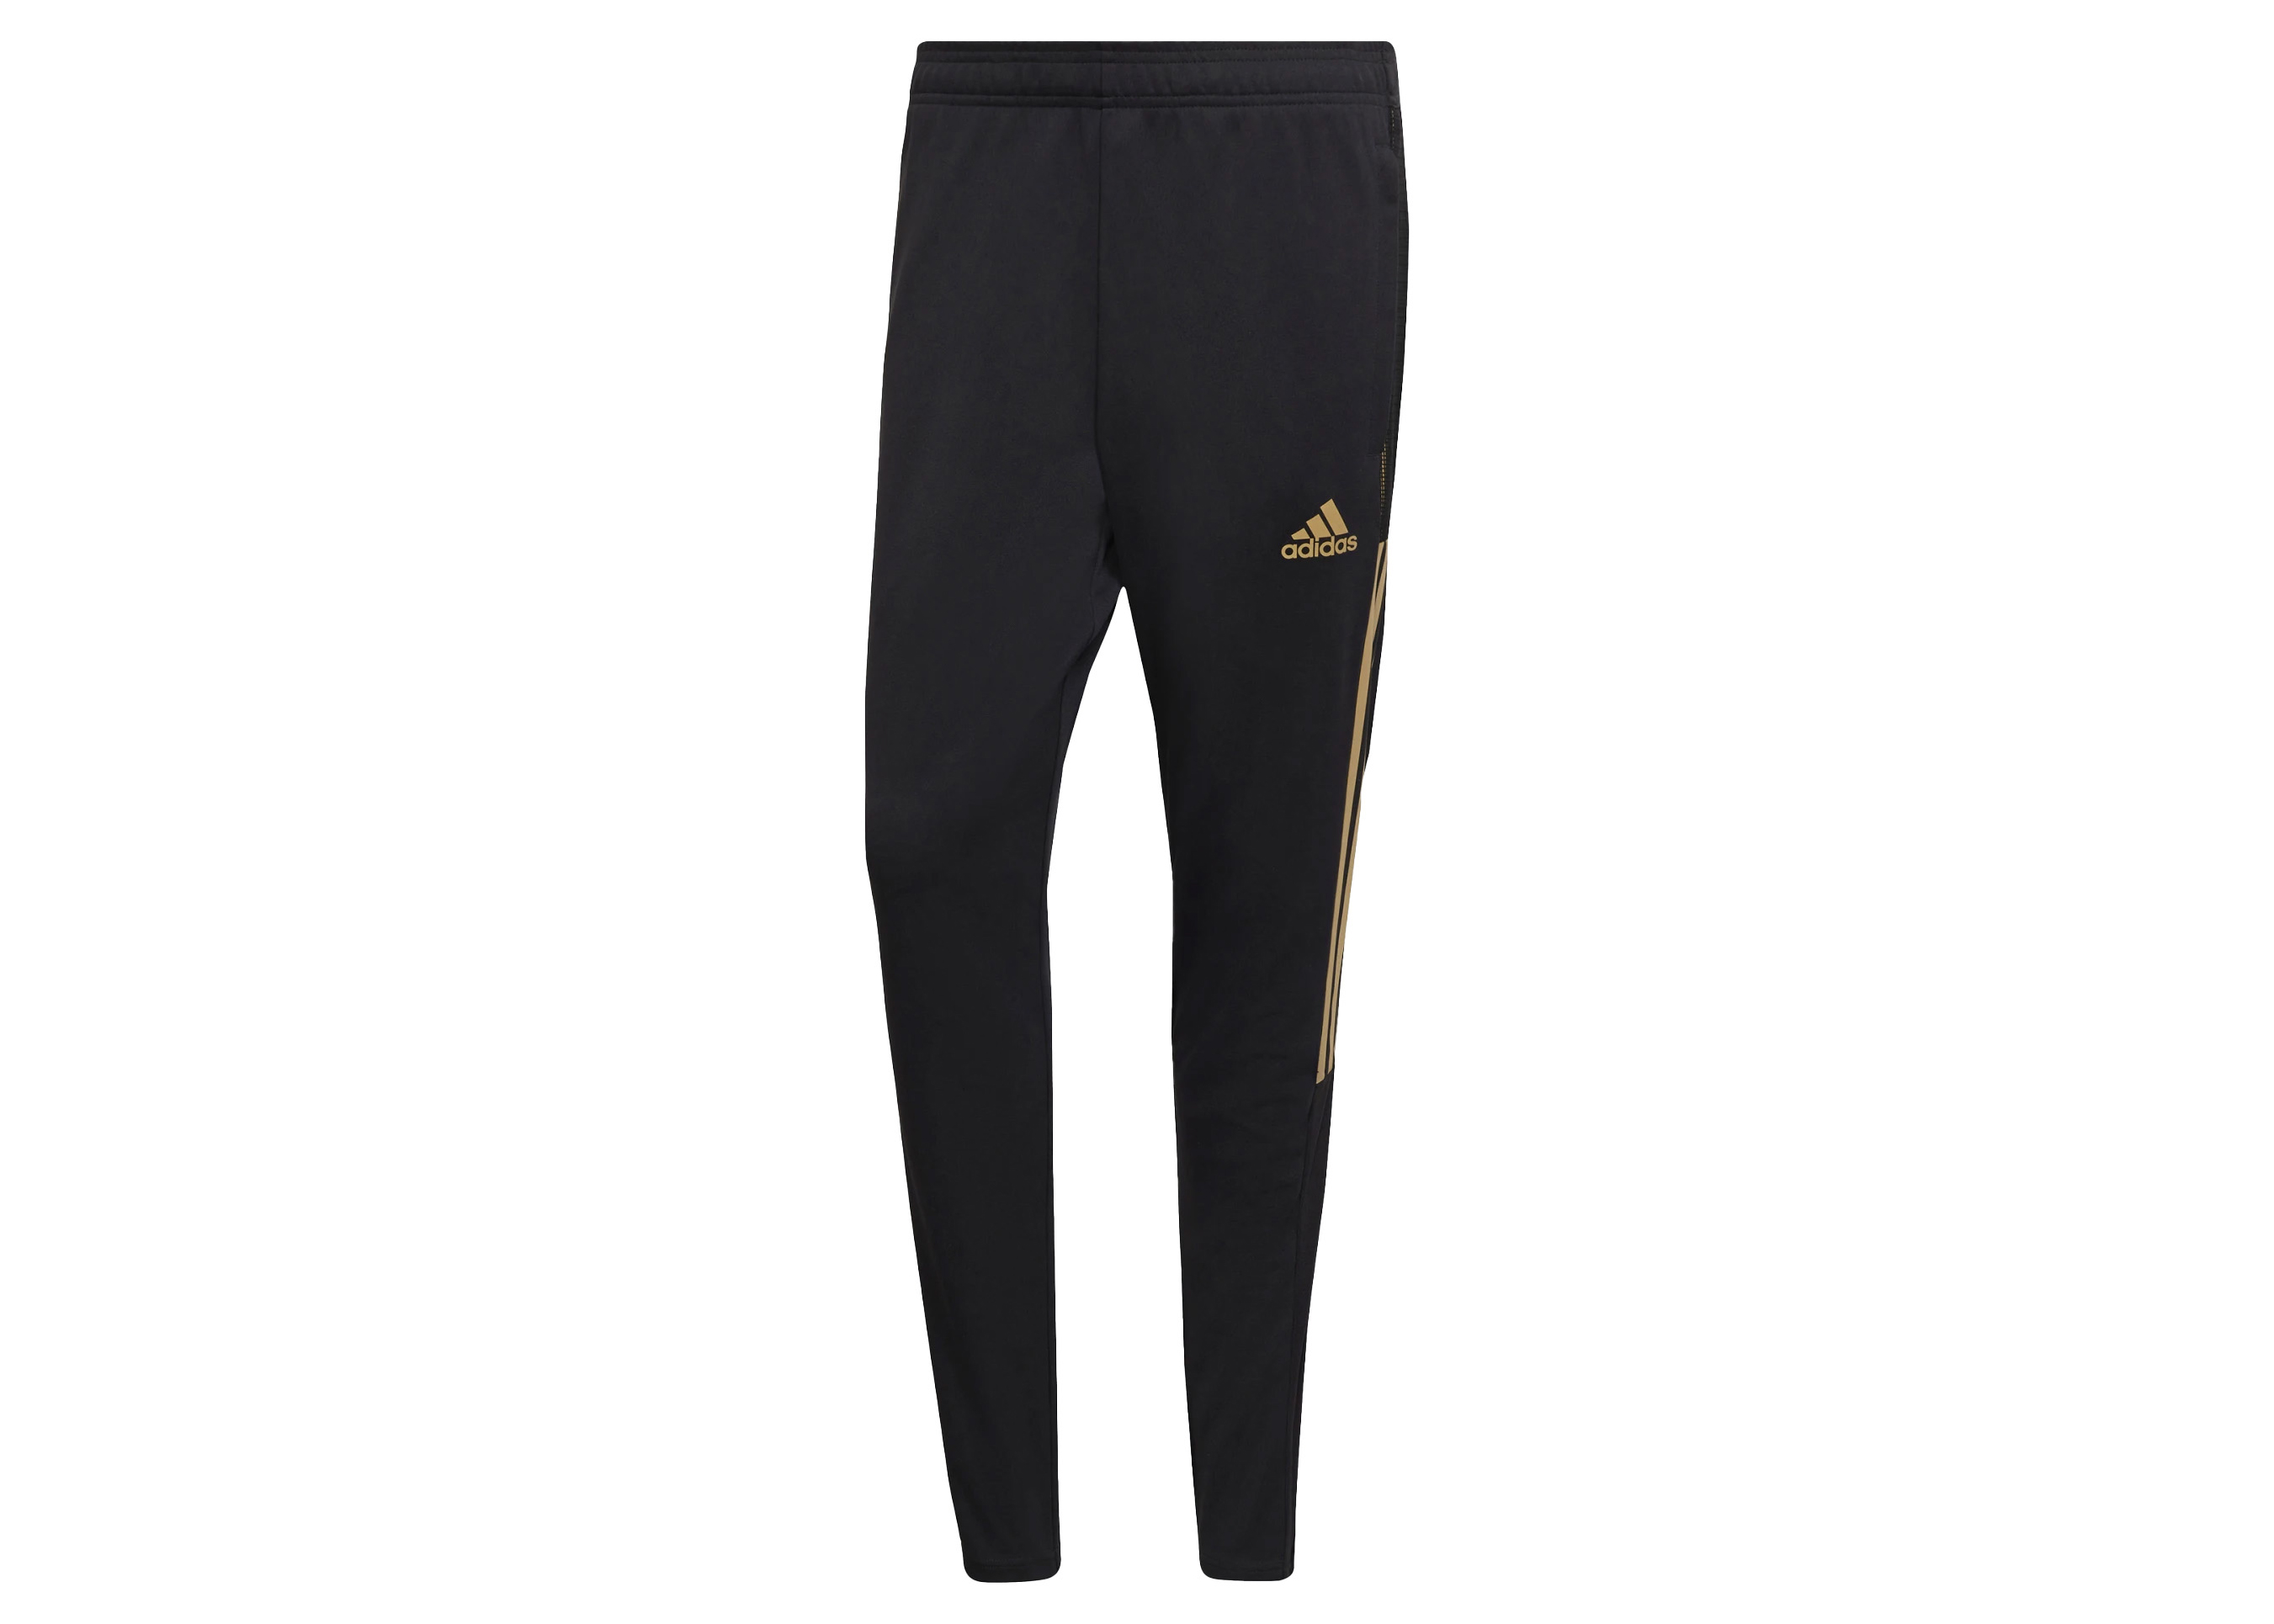 Adidas Originals Joggers Pants Black  Gold 3 stripes Womens Fashion  Activewear on Carousell